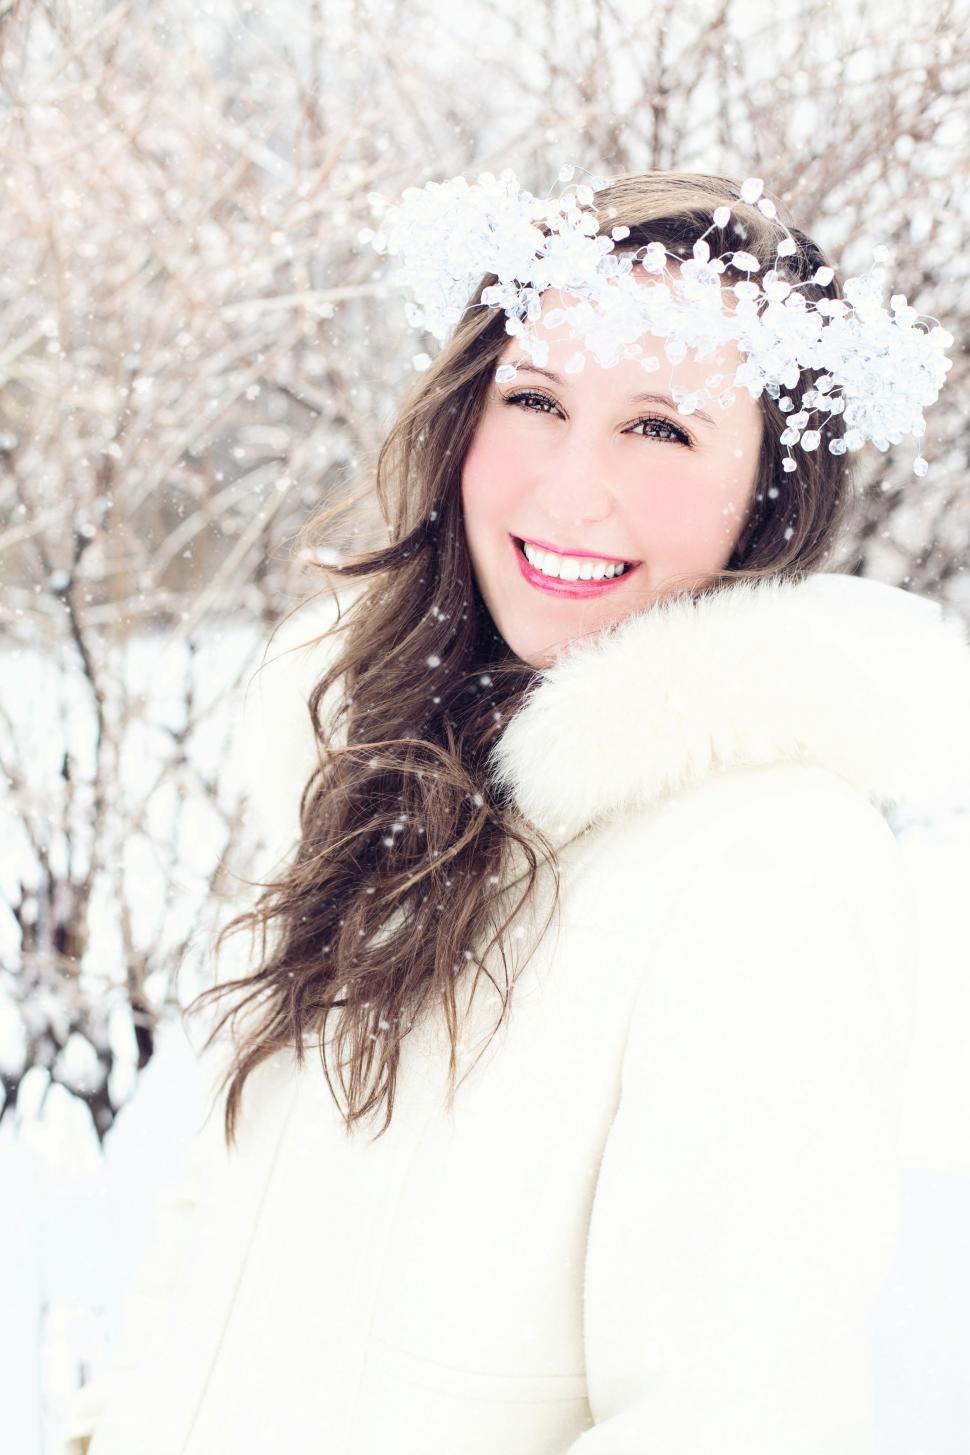 Free Image of Woman in Snow with snowflakes crown 